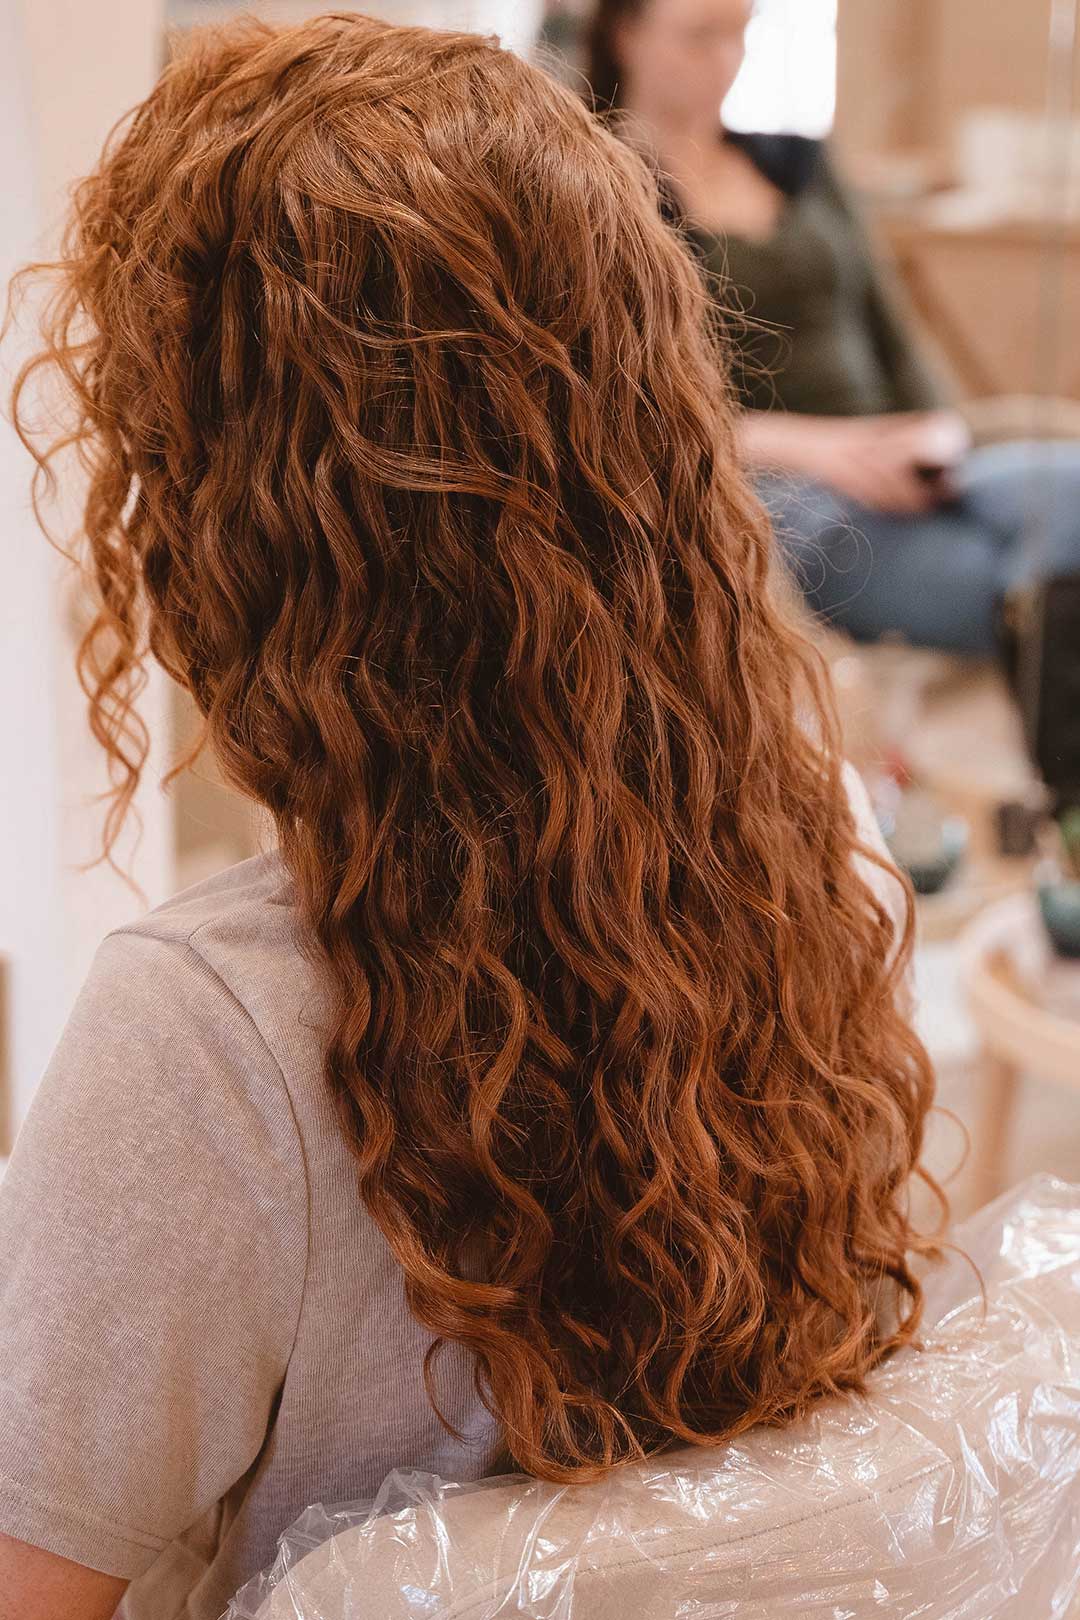 10 Things You Should Do If You Have Fine Hair - Curl Maven